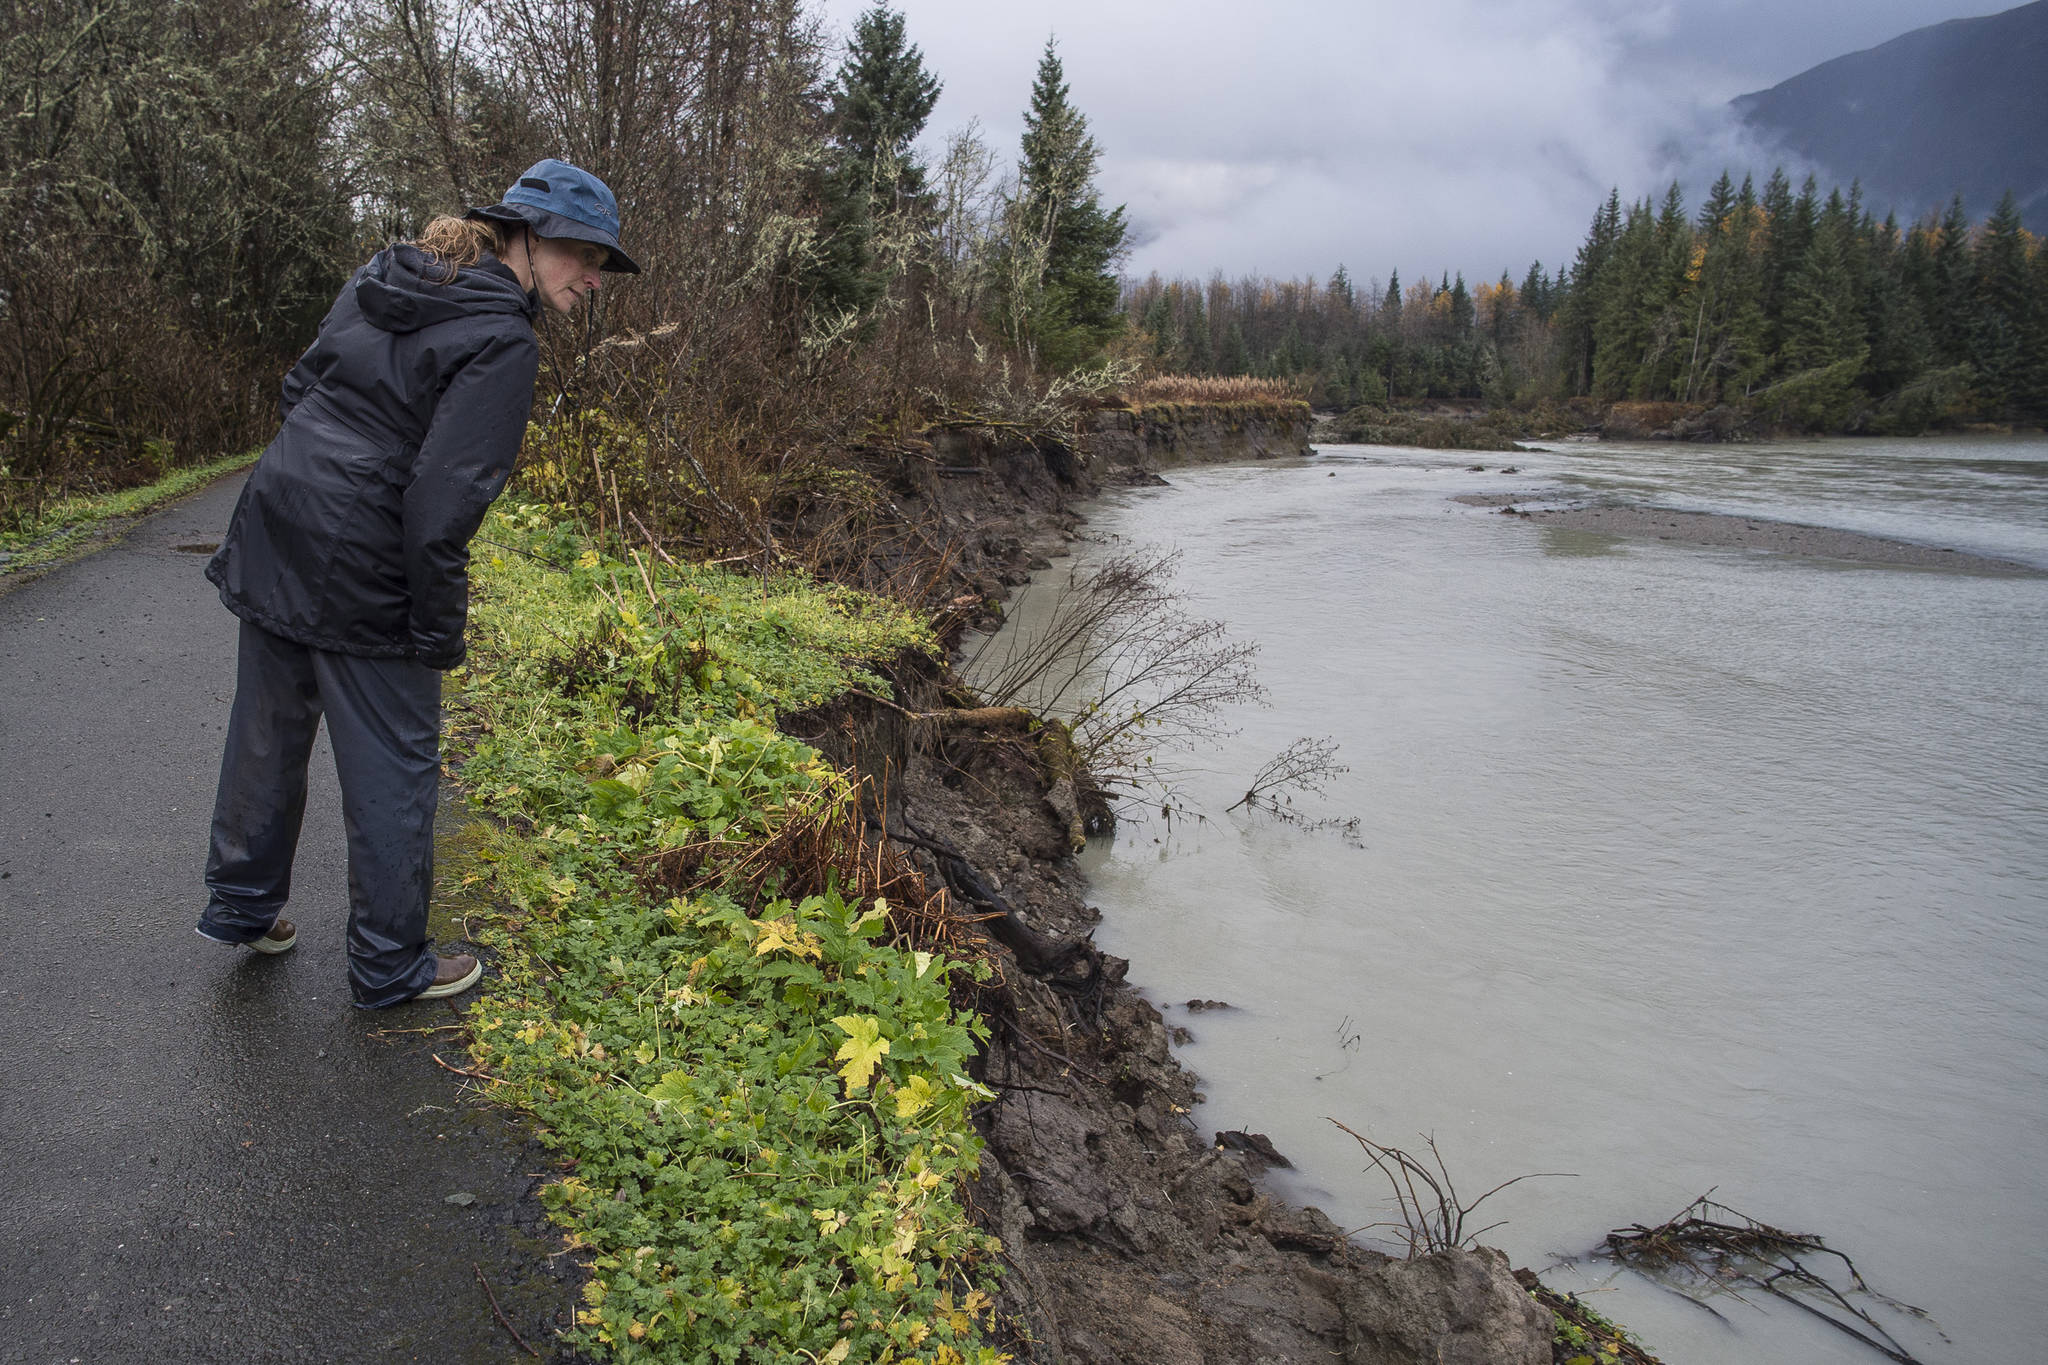 Sonia Nagorski, assistant professor of Geology Arts and Sciences at the University of Alaska Southeast, investigates erosion below the broken oxbow along the Mendenhall River on Wednesday, Oct. 17, 2018. The river cut through the meander bend just north of the Brotherhood Bridge last this summer. (Michael Penn | Juneau Empire)